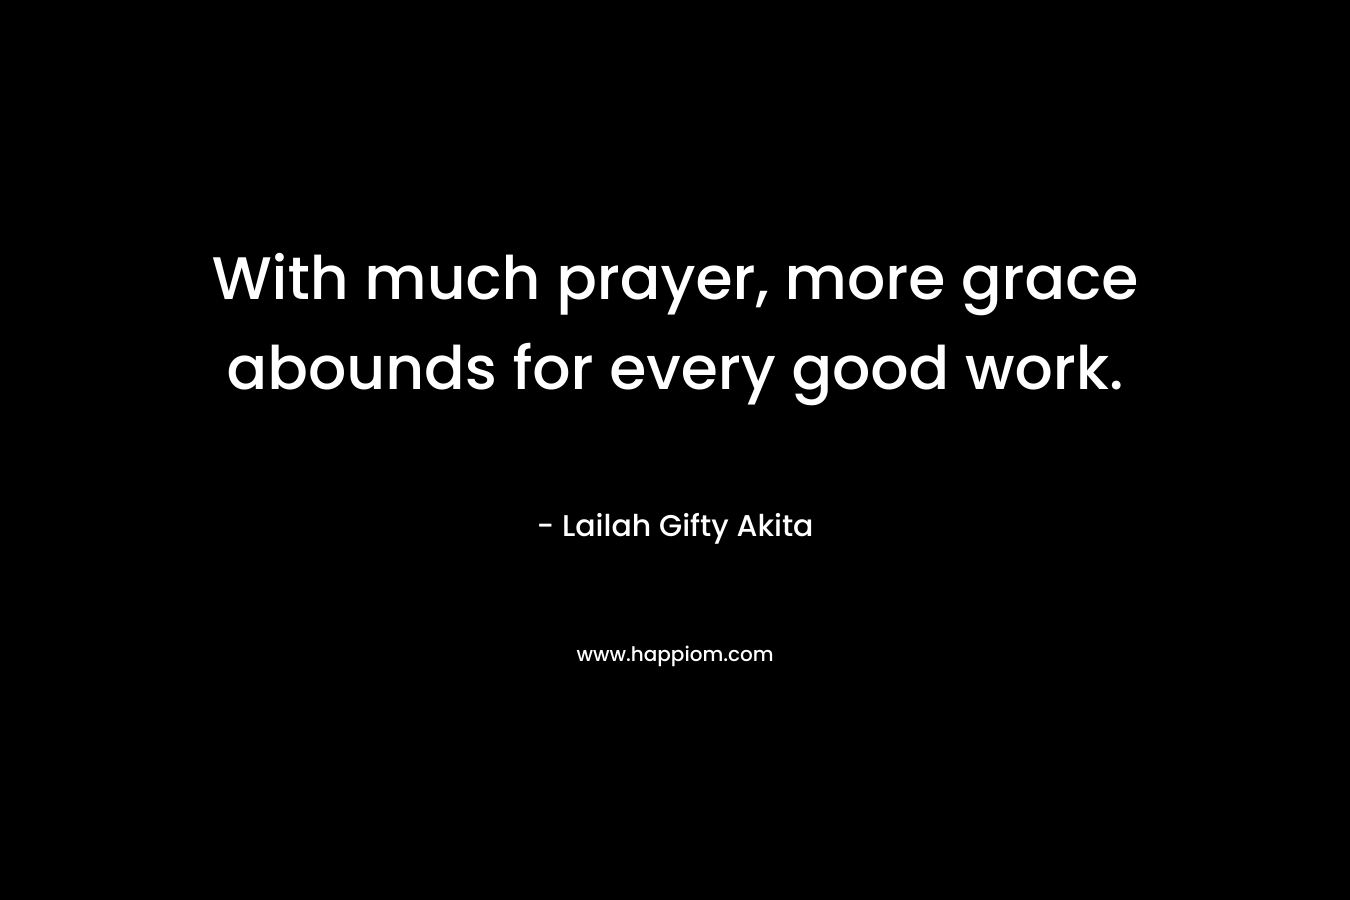 With much prayer, more grace abounds for every good work. – Lailah Gifty Akita